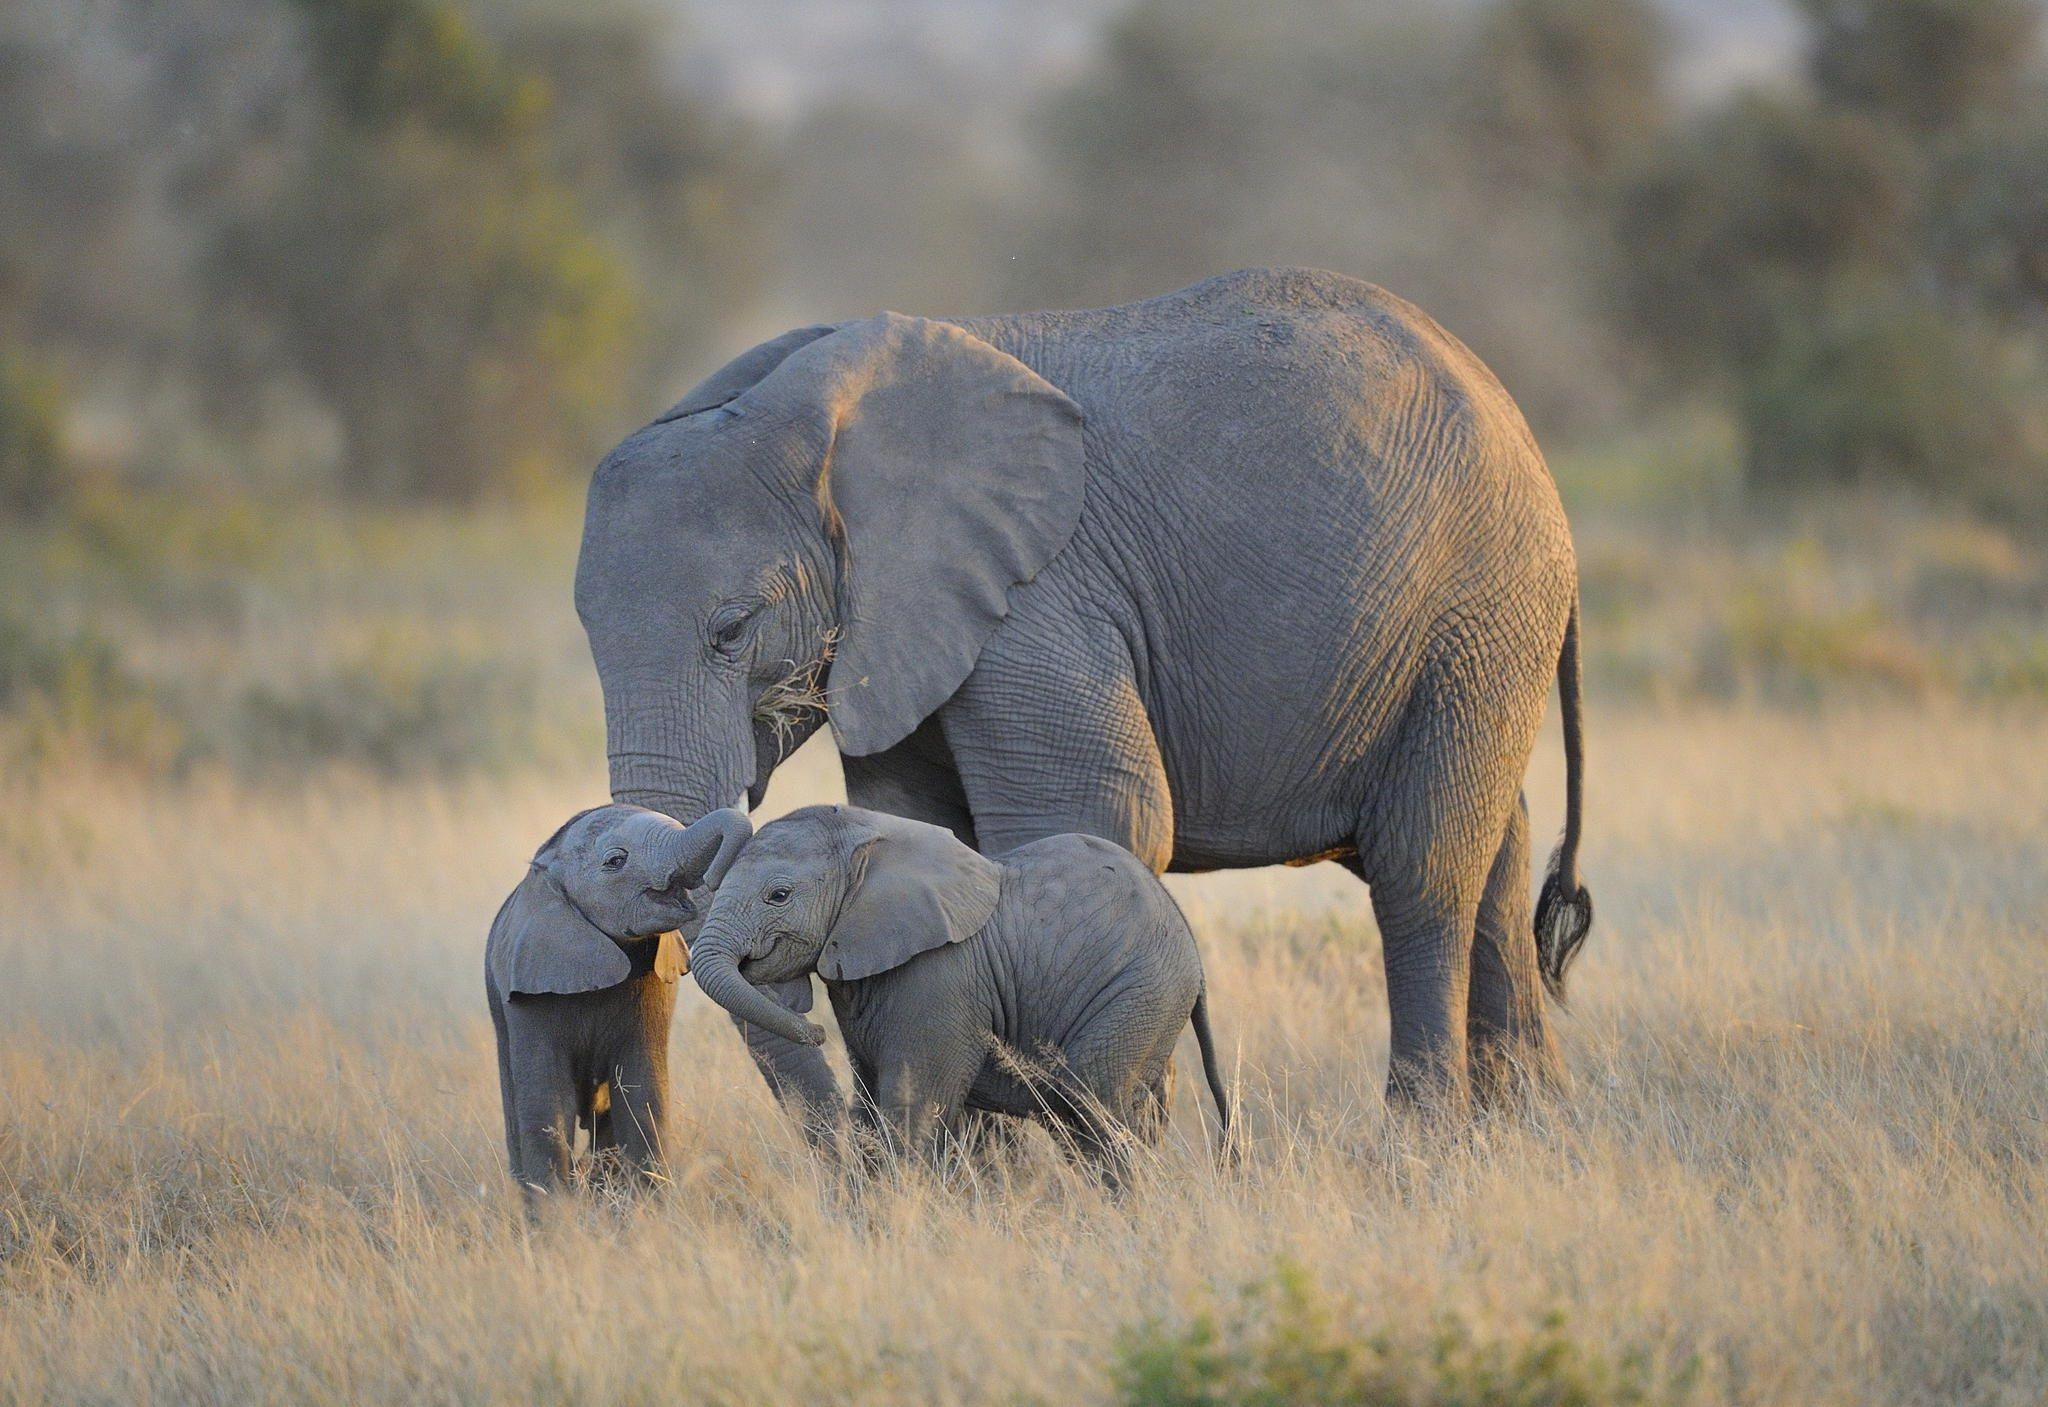 Baby Elephant And Mother Wallpaper High Resolution, Animals. Elephants photo, Baby elephant, Elephant picture